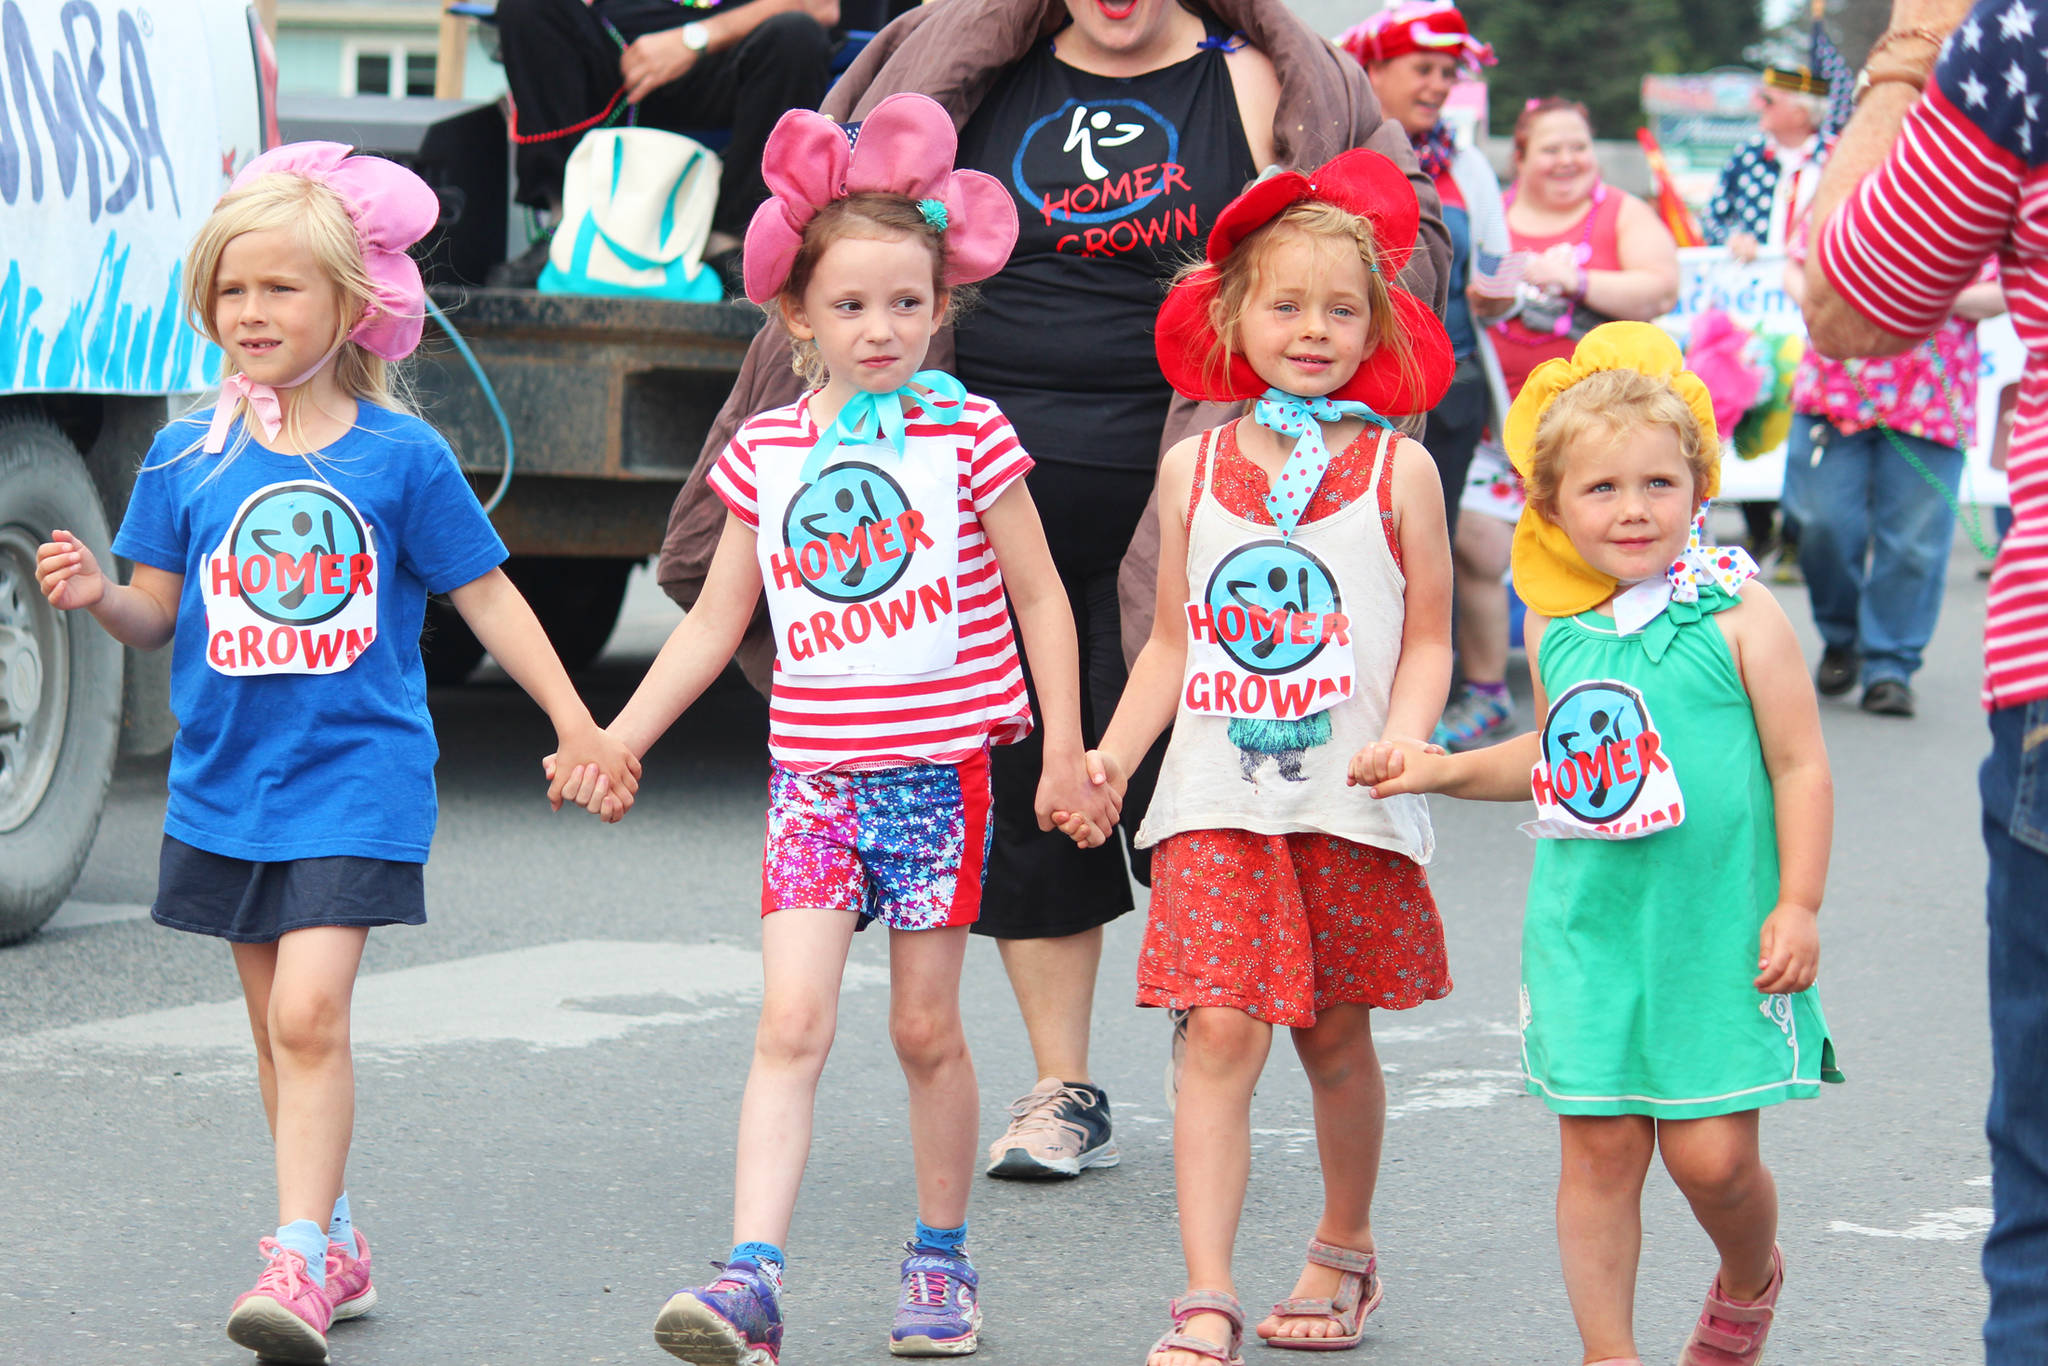 Photos by Megan Pacer / Homer News                                A group of girls walking with the Zumba in Homer display their “Homer Grown” signs during the July Fourth parade on Thursday, July 4, 2019 on Pioneer Avenue in Homer, Alaska. The Zumba in Homer float won the prize for “Best Children’s Group.”